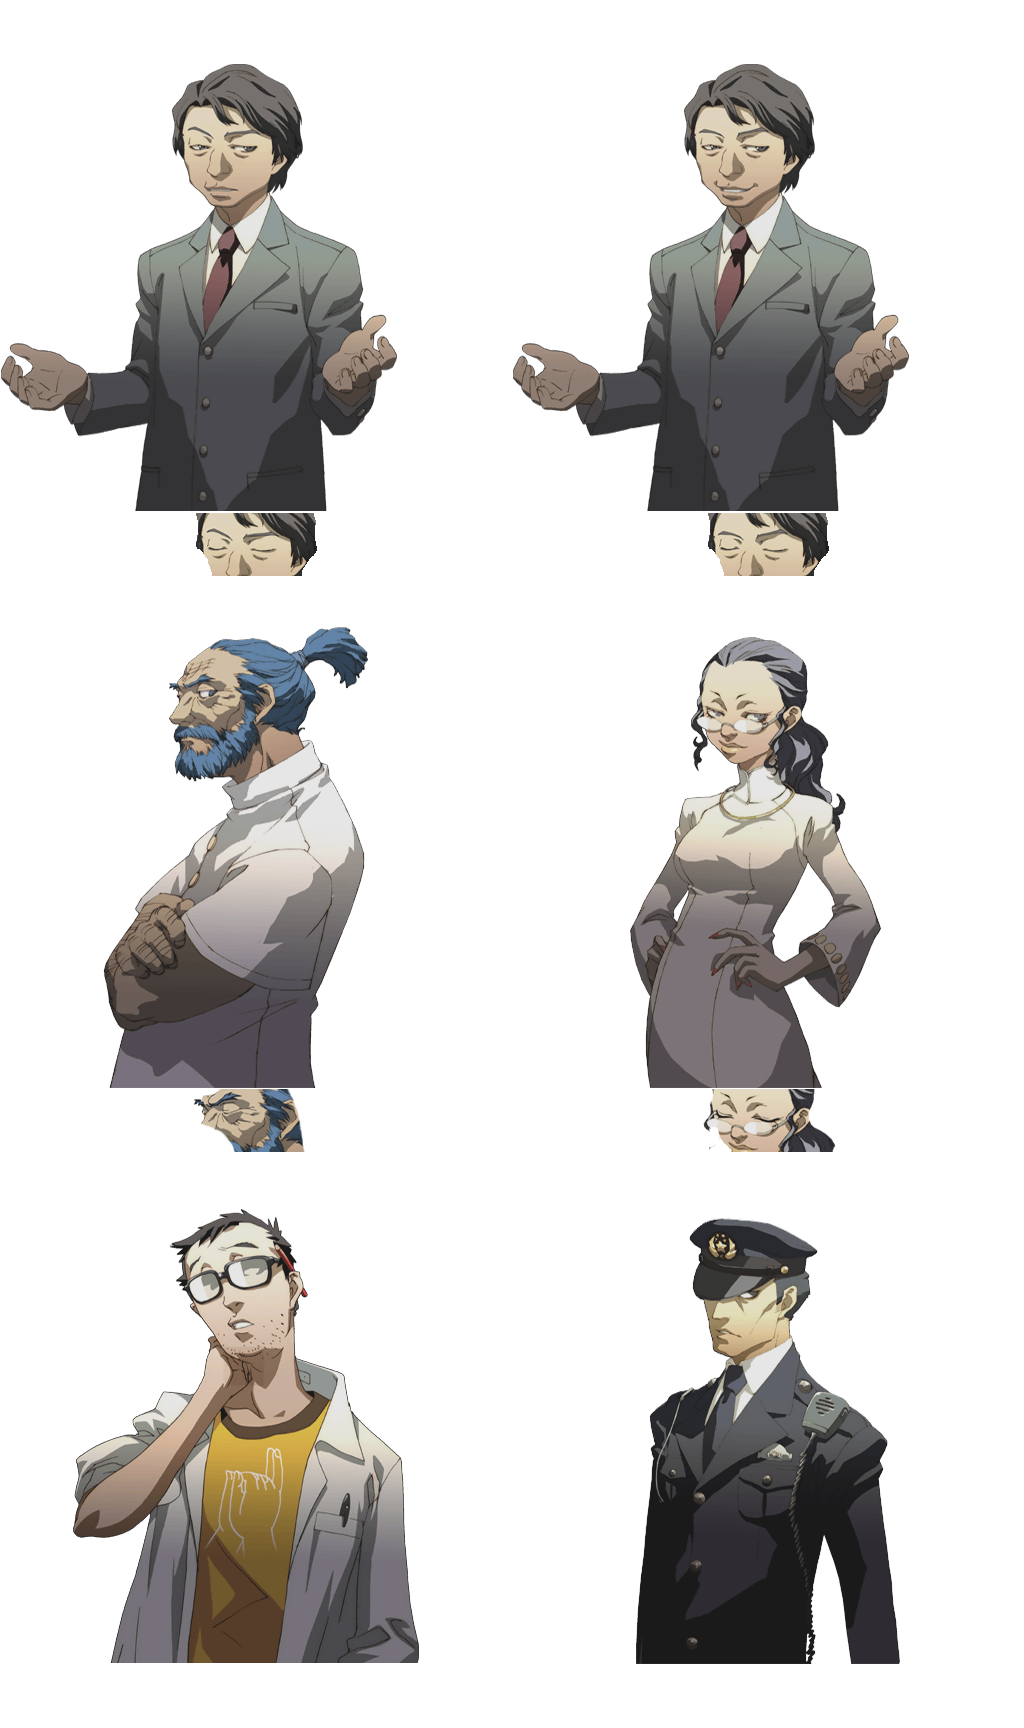 Persona 3 - Other Characters